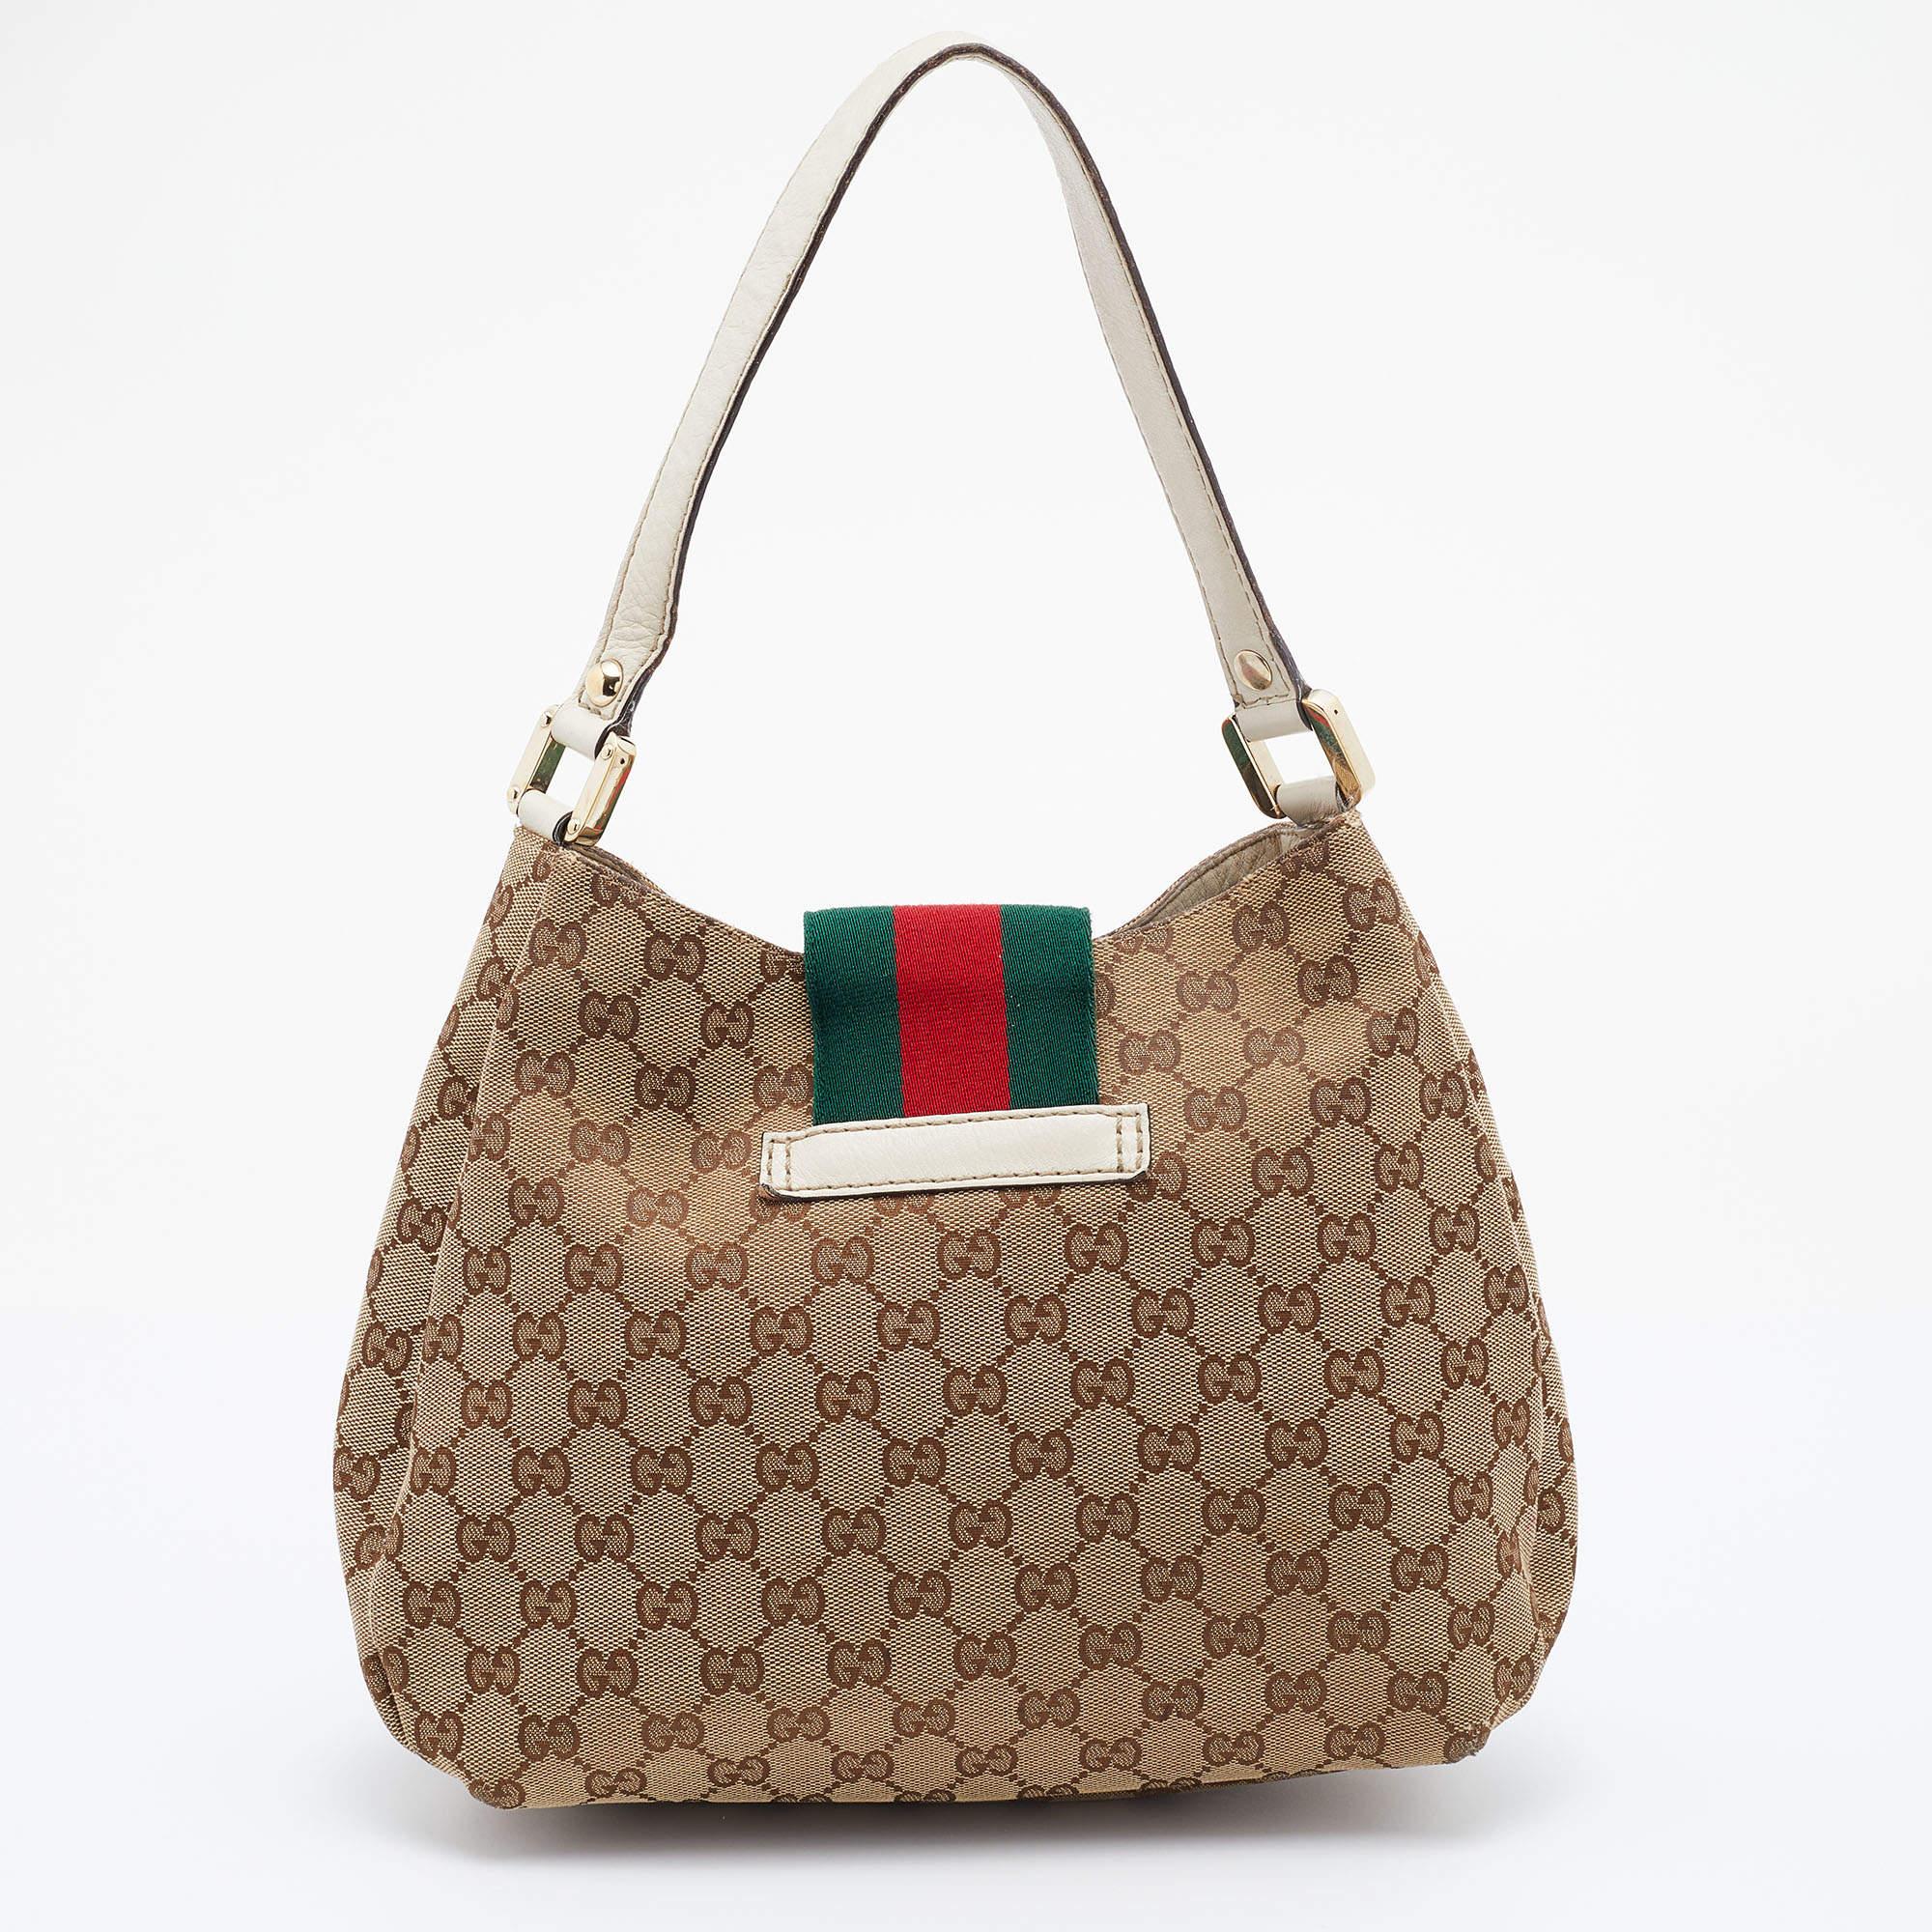 Crafted from GG canvas and leather in Italy, this gorgeous bag from Gucci is a design that has never gone out of style. It has a Web strap detail and a spacious fabric interior. Held by a single handle, this bag is ideal for daily use.

Includes: